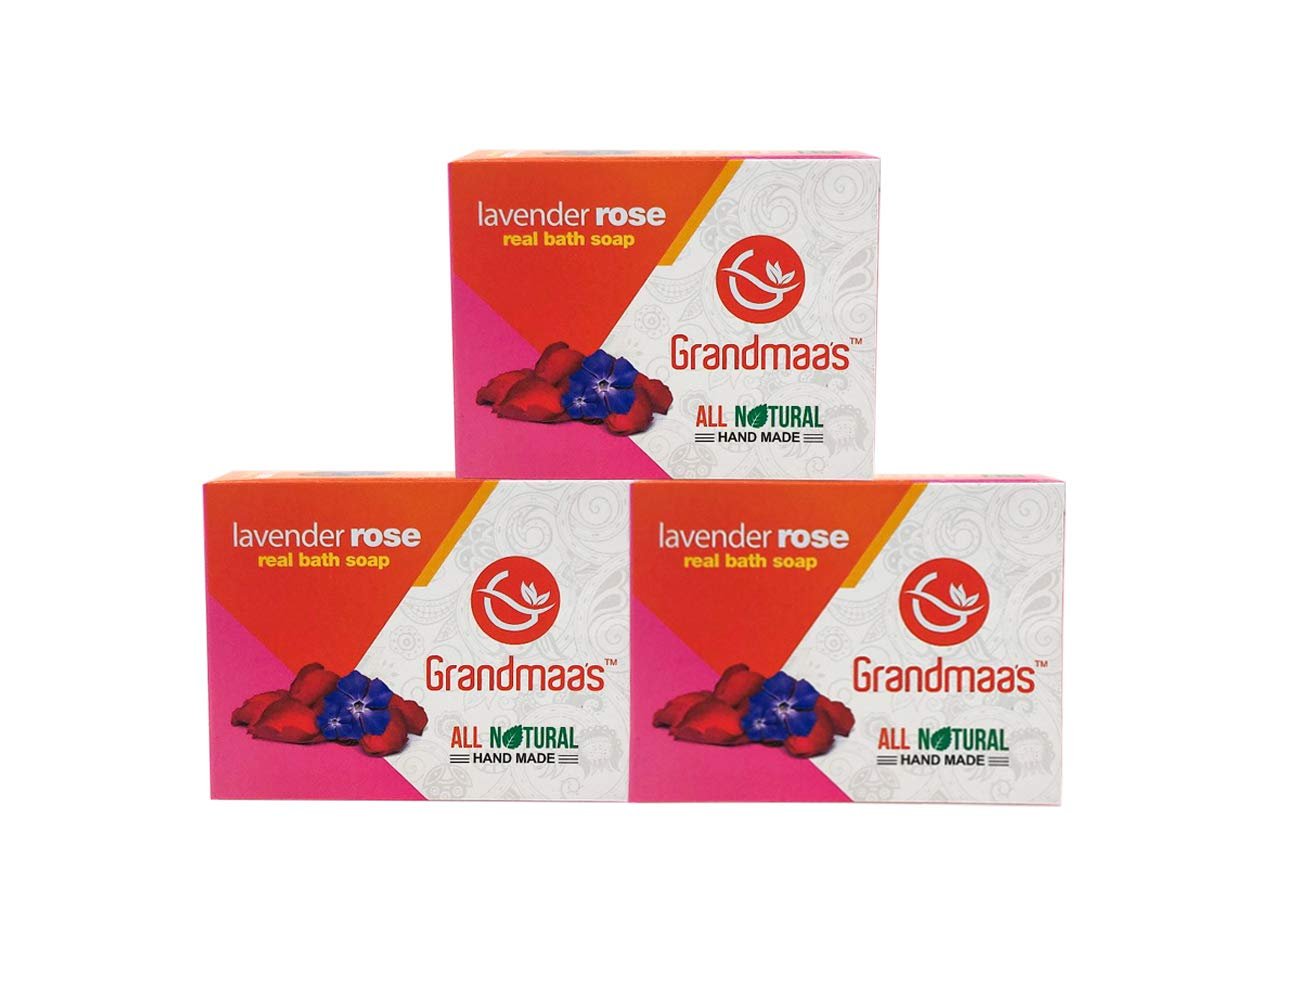 Grandmaas All Natural Handmade Lavender Rose Bath Soap - Pure Extract of Rose and Lavender - Herbal Skin Care Real Bath Soap  100 Gm x 3 Pack